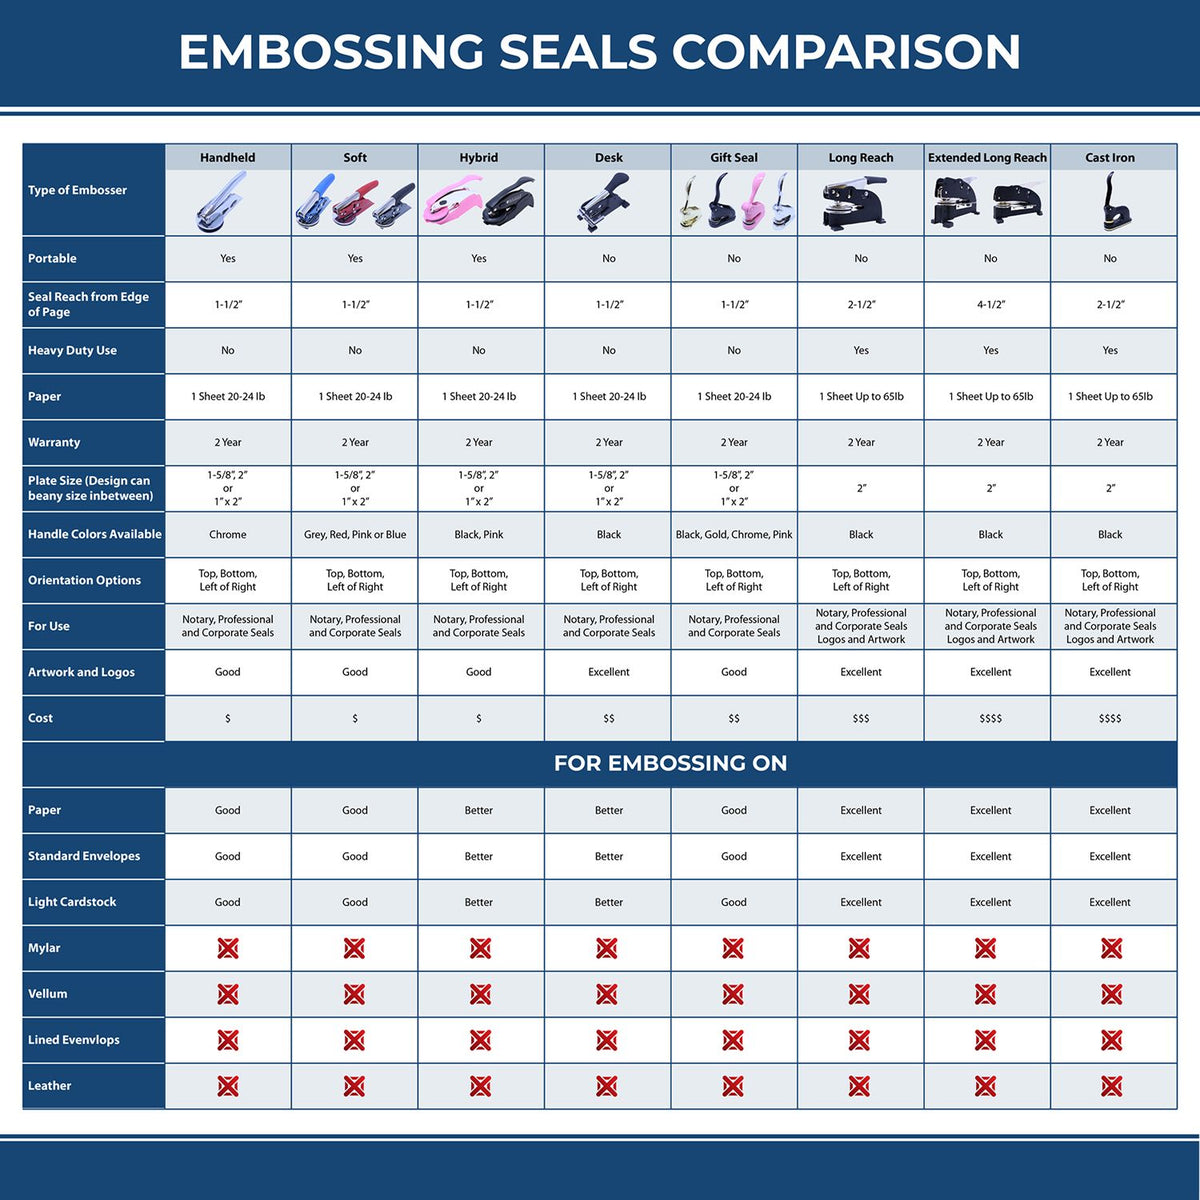 A comparison chart for the different types of mount models available for the Long Reach Michigan PE Seal.